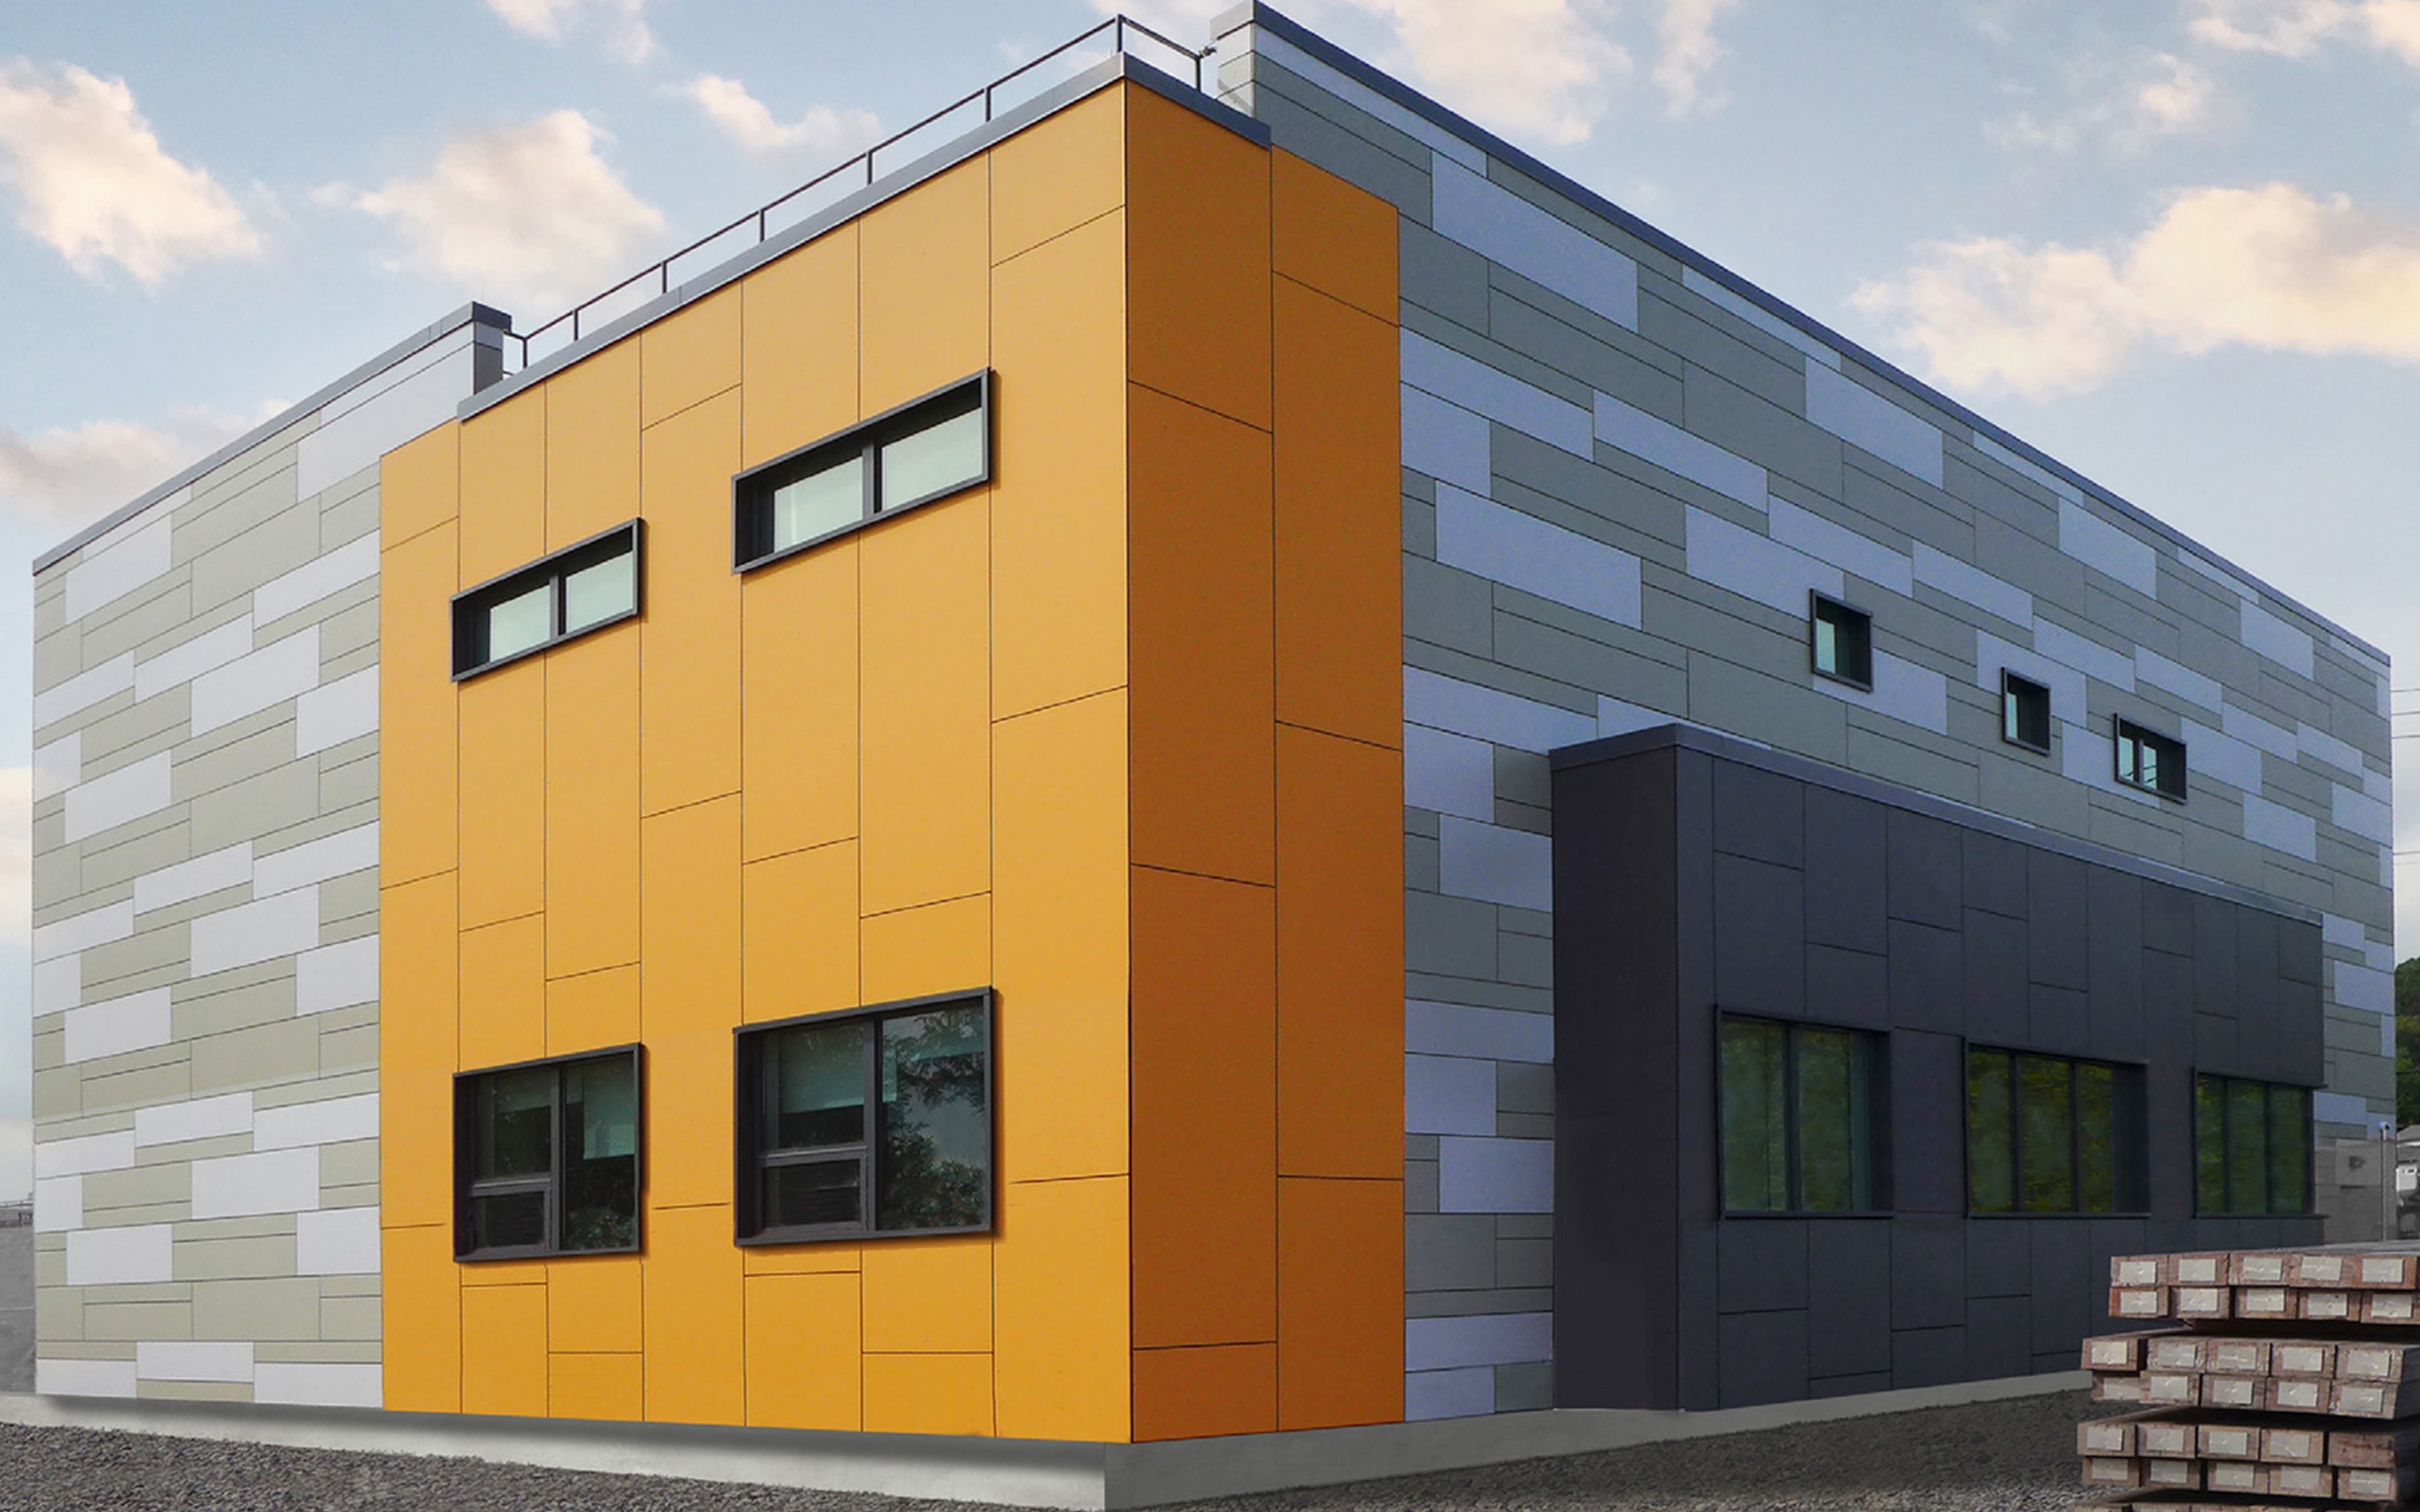 Colorful yellow façade at the backend of the police facility